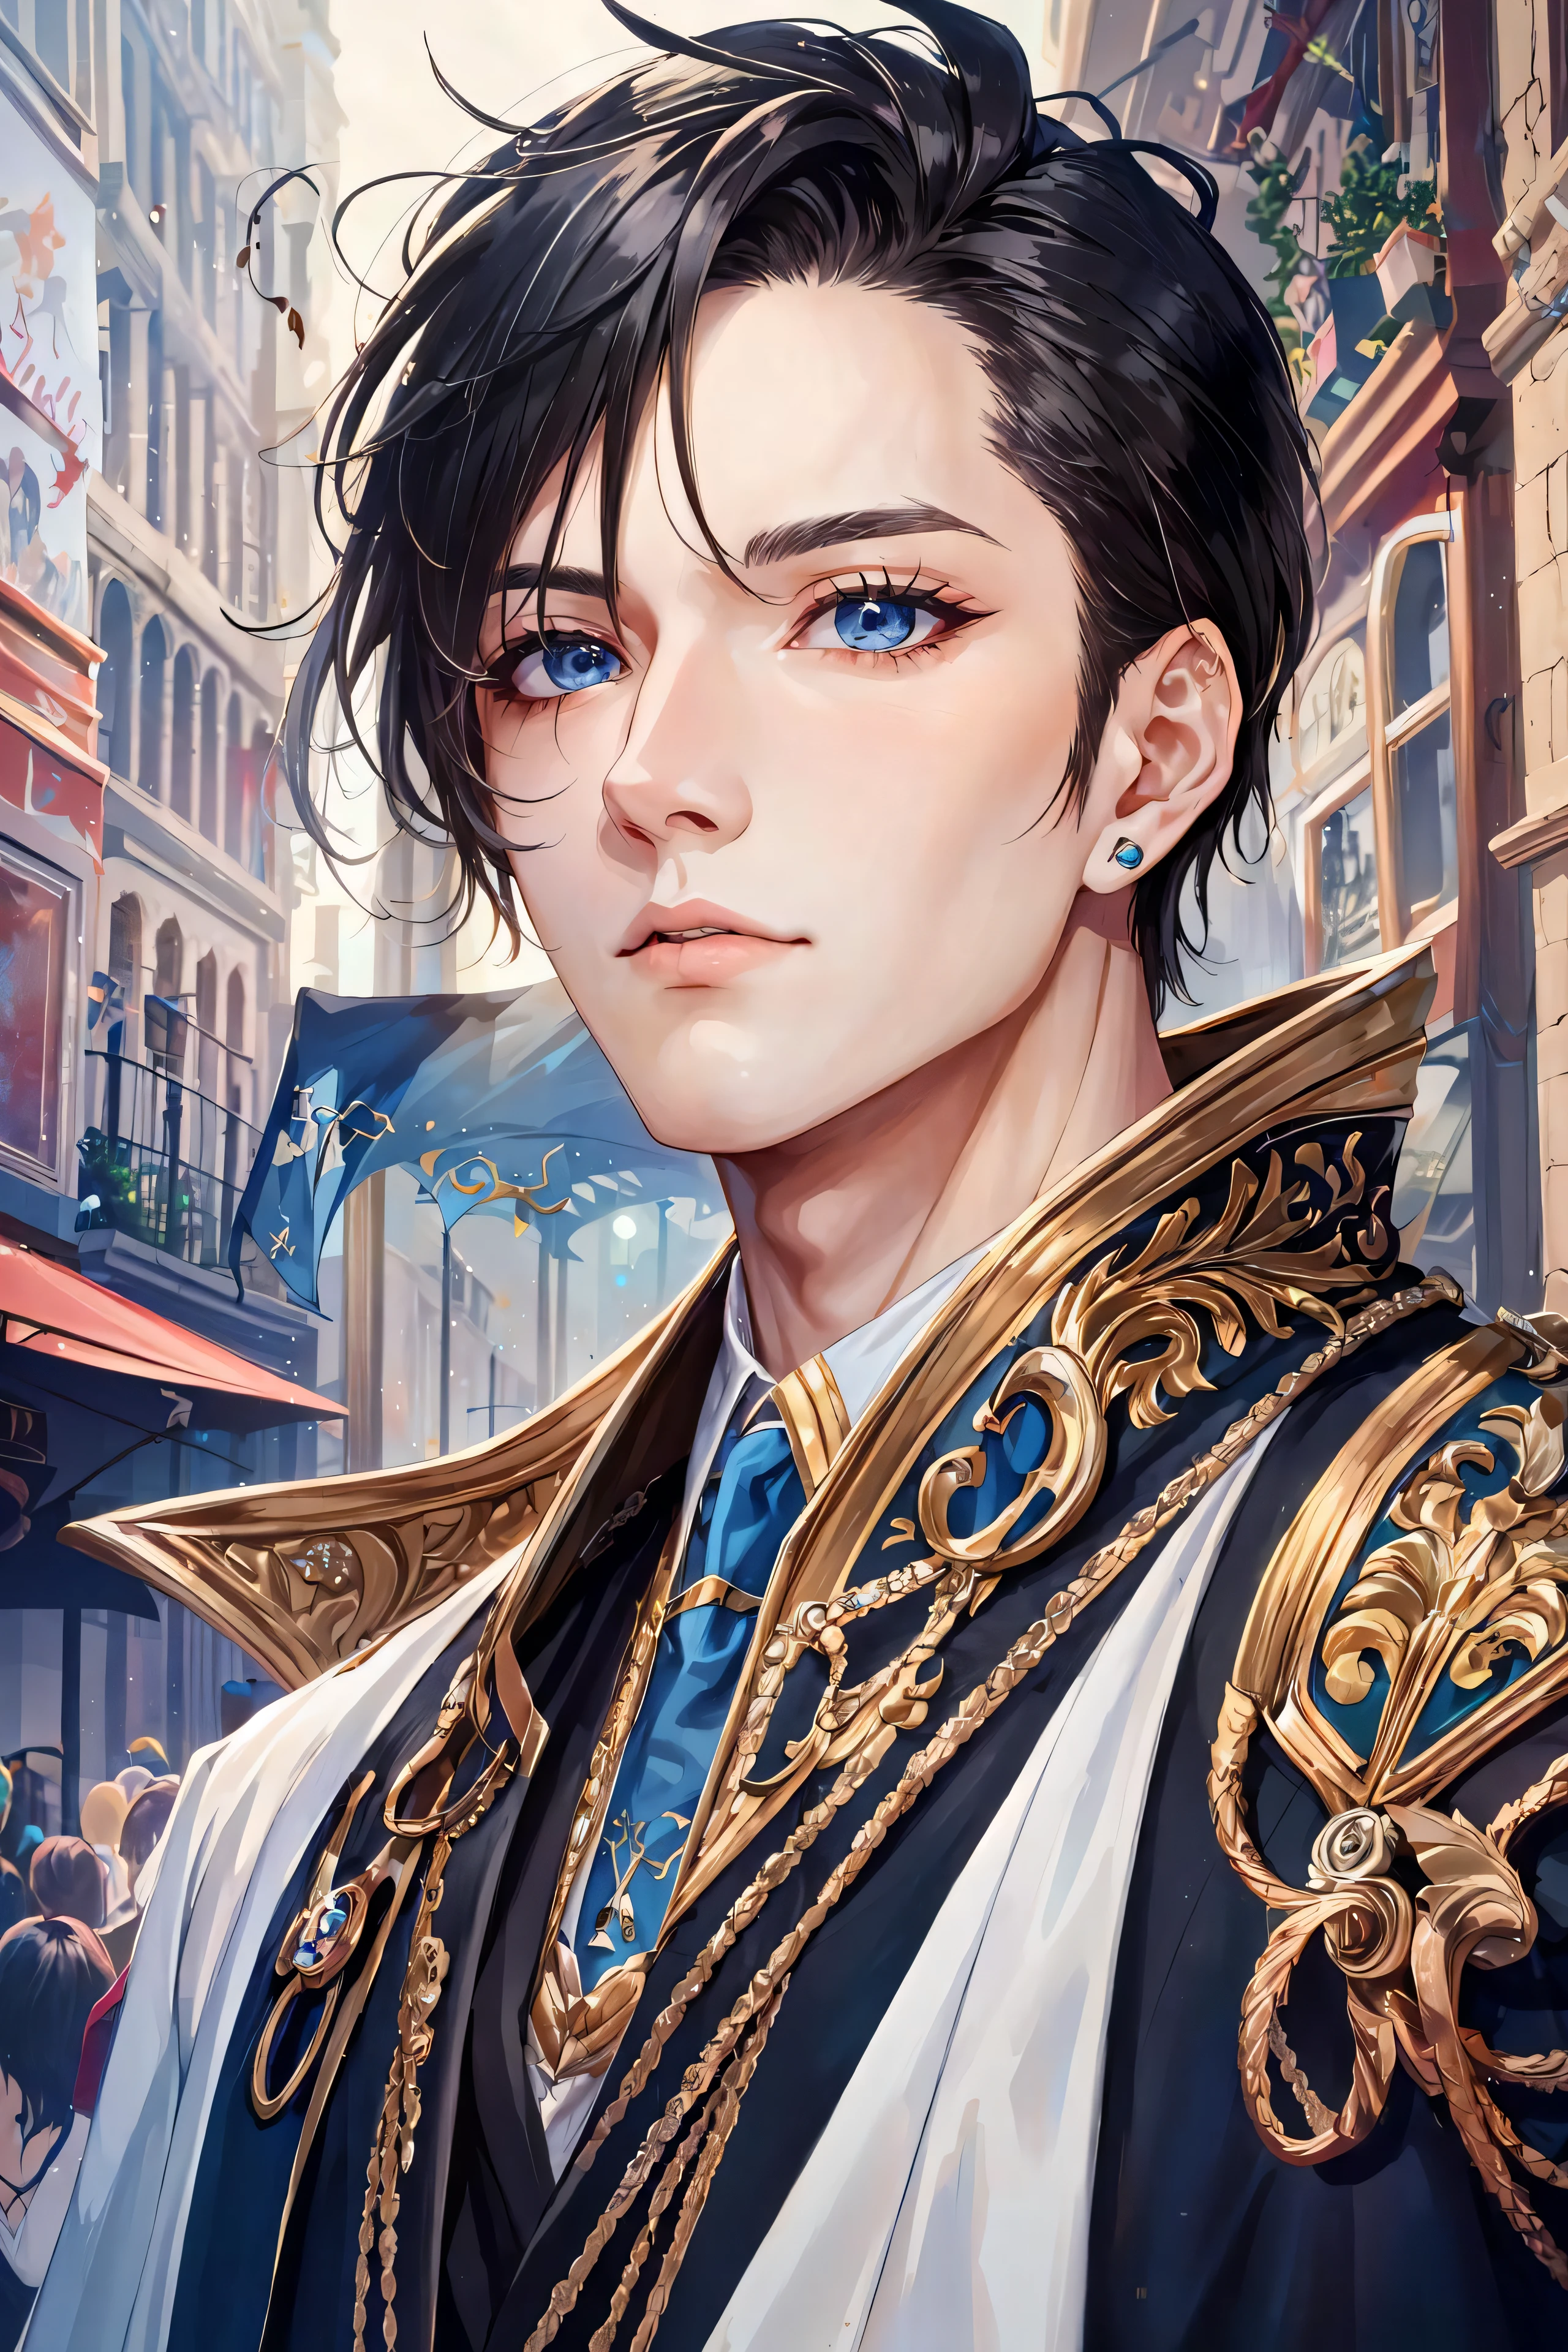 (masterpiece:1.2), (best quality:1.2), perfect eyes, perfect face, perfect lighting, (1boy:1.3), young noble boy, androgynous, long hair, gorgeous, thick eyelashes, makeup, rich clothes, colorful, fantasy, detailed outdoor city background